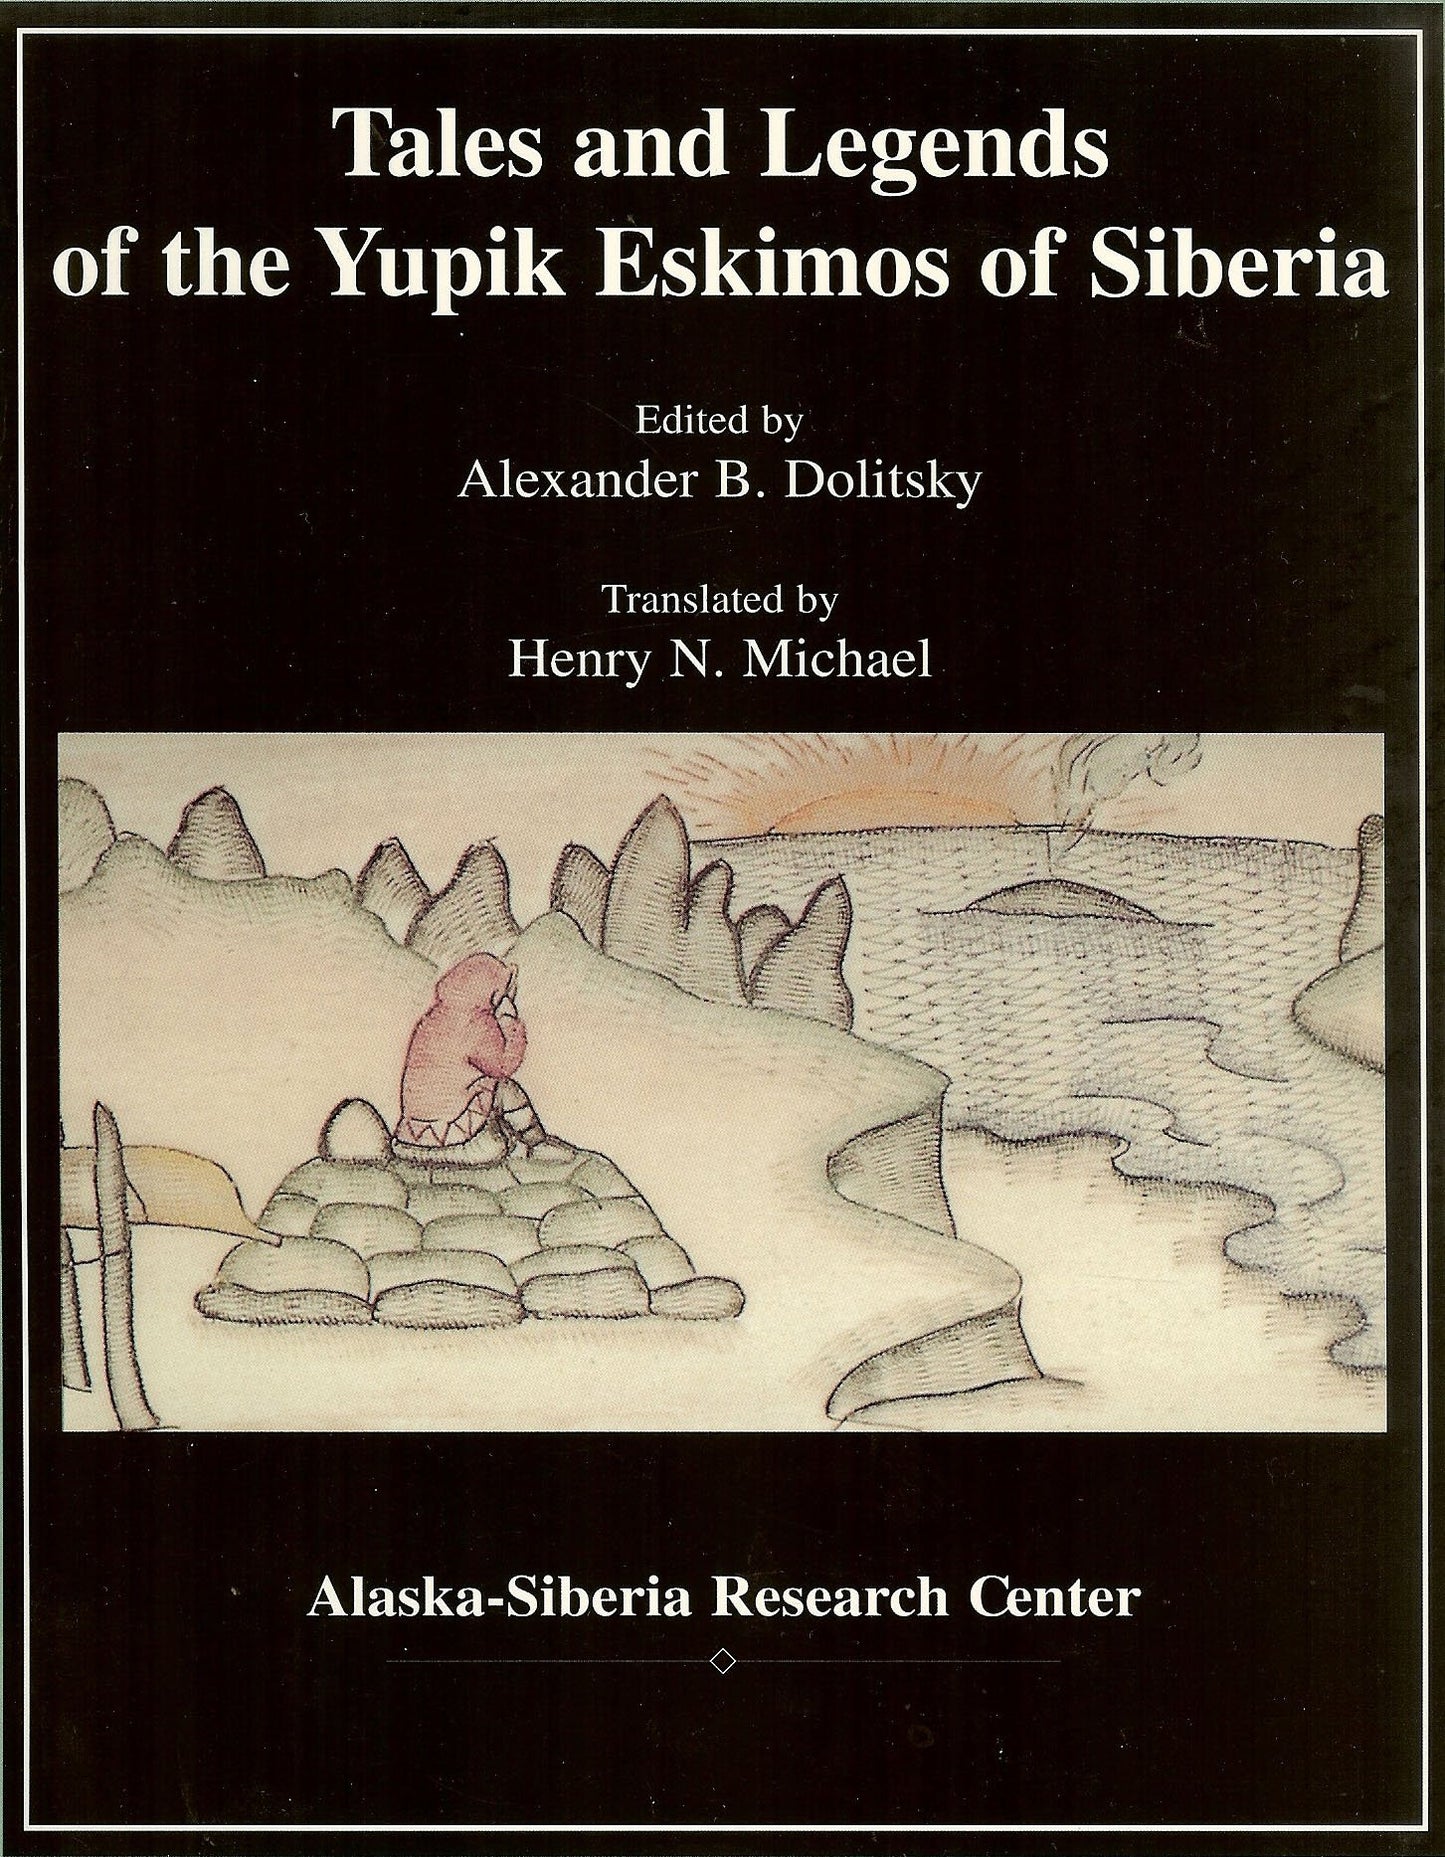 Tales and Legends of the Yup'ik Eskimos of Siberia by Alexander B. Dolitsky and Henry N. Michael